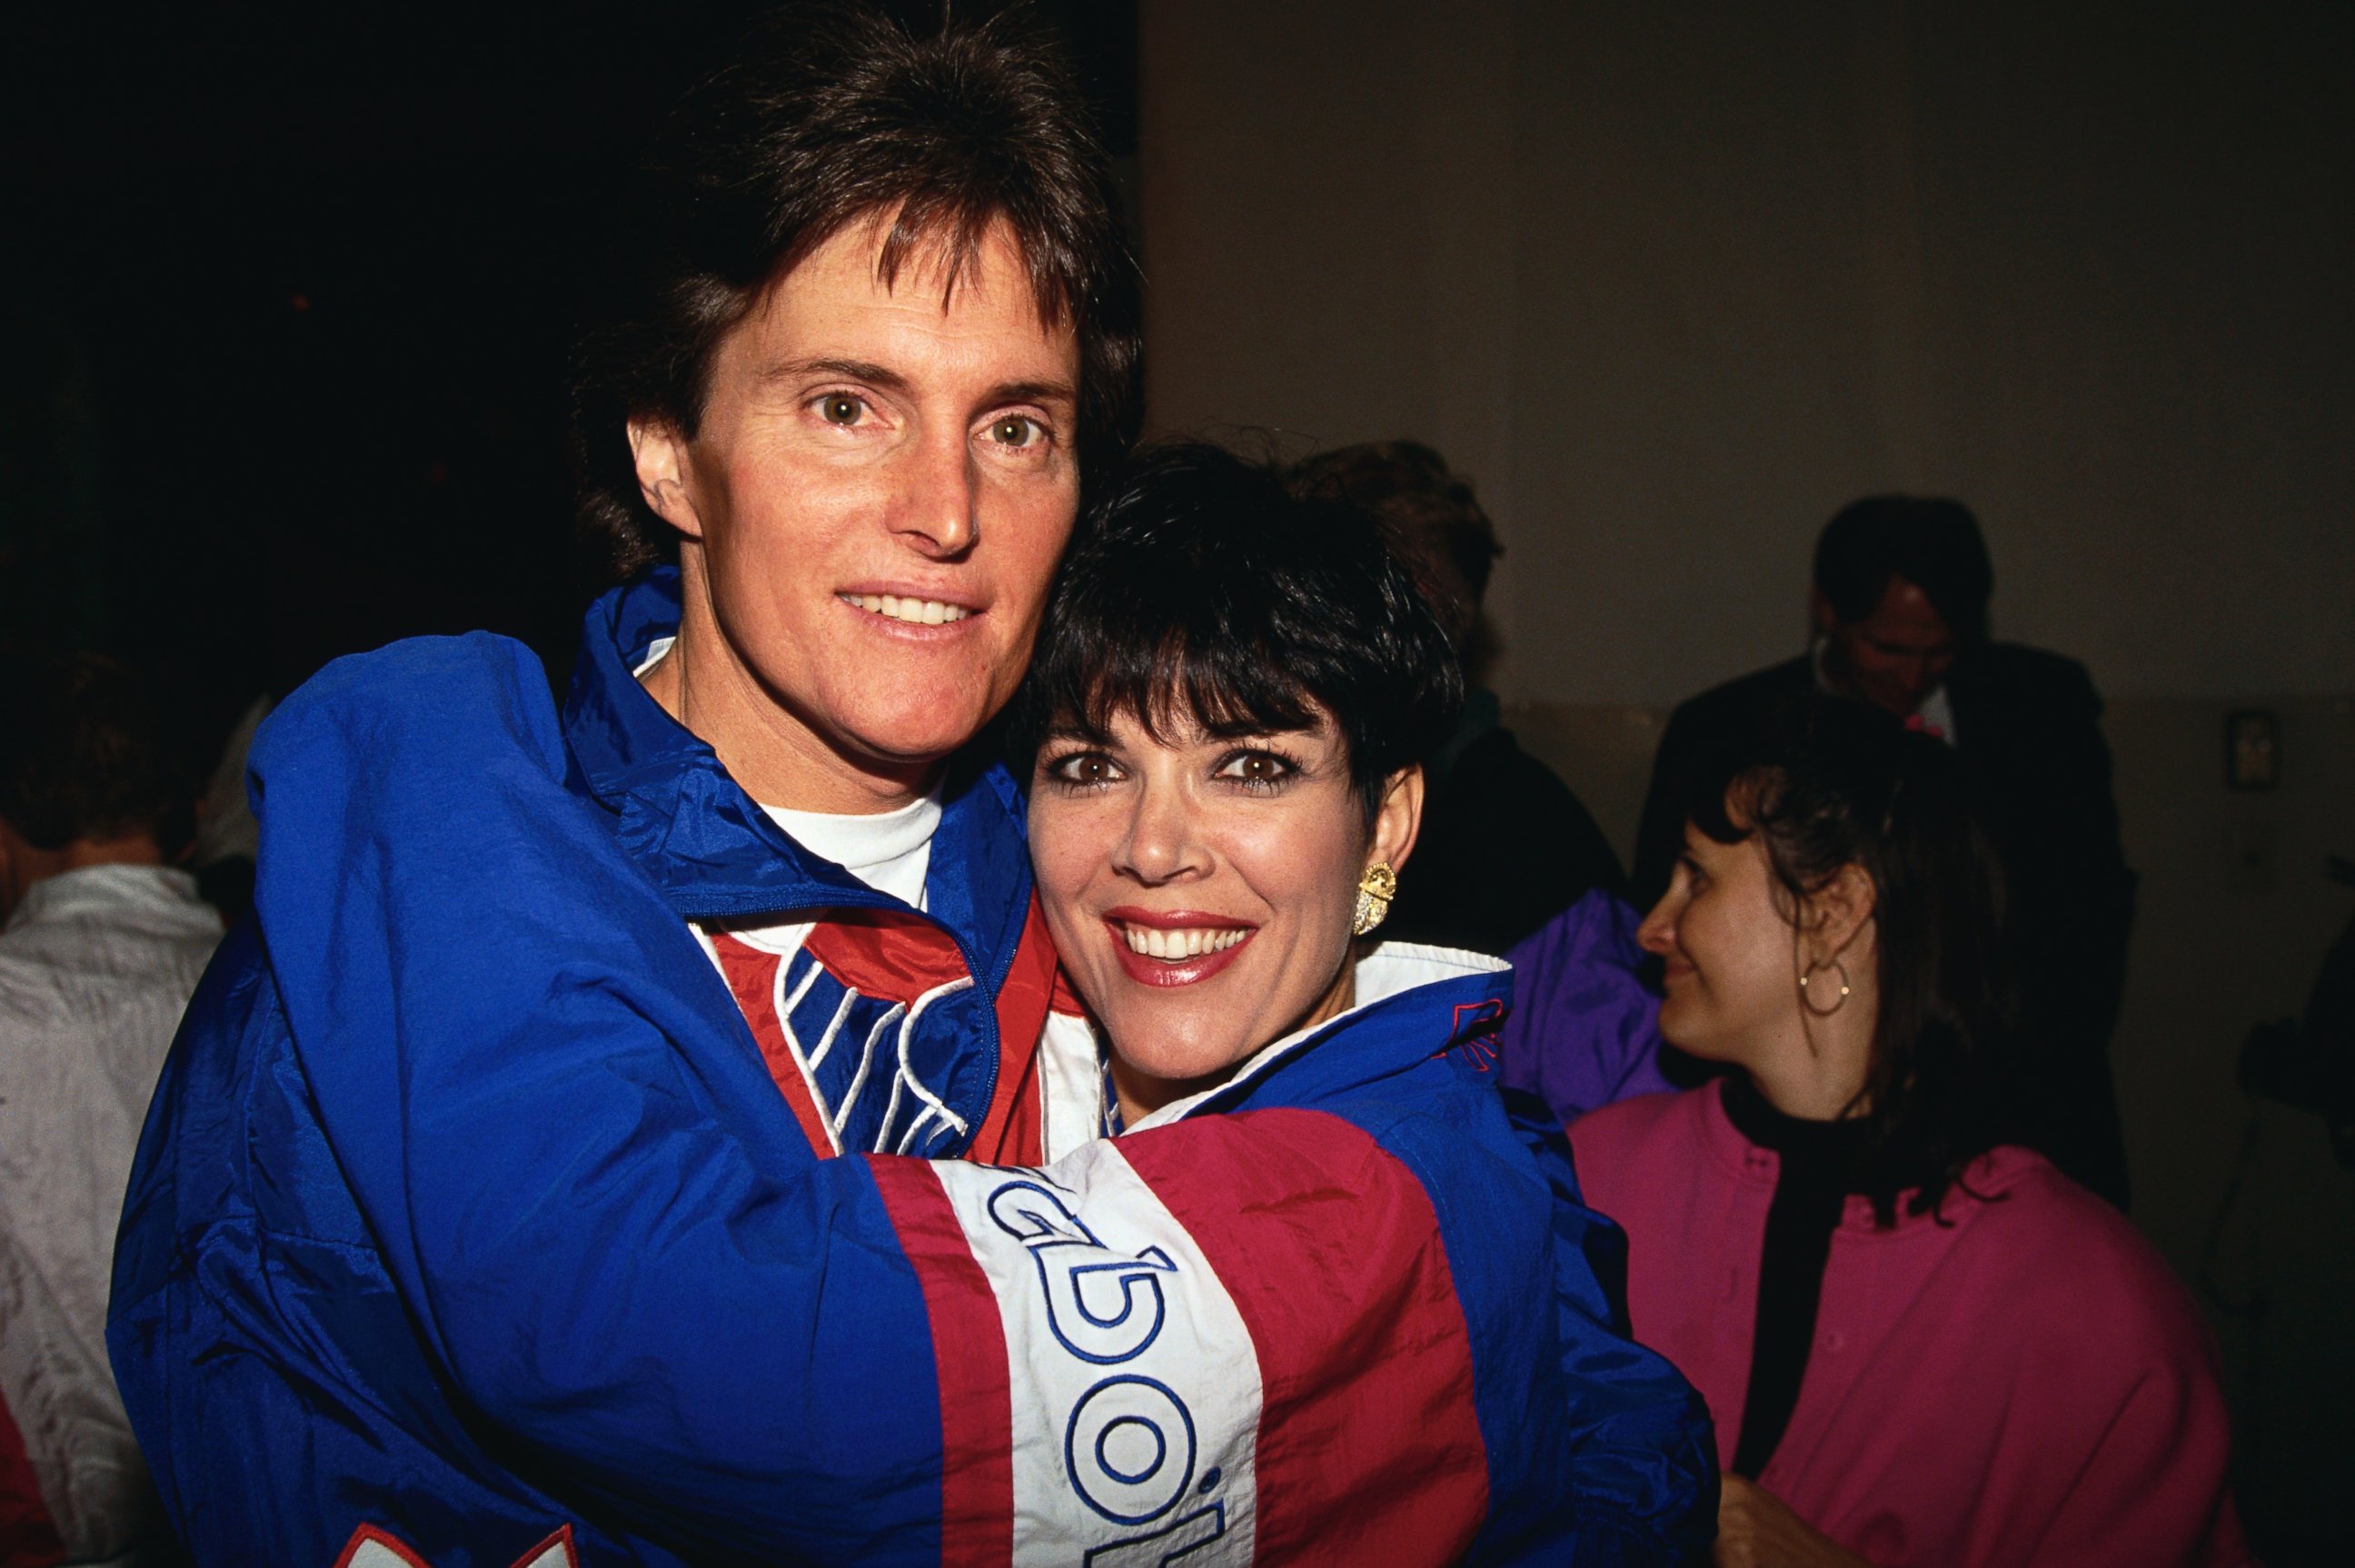 PHOTO: Bruce Jenner and Kris Jenner are seen in this Feb. 24, 1993 file photo during a President's Council on Physical Fitness and Sports event.